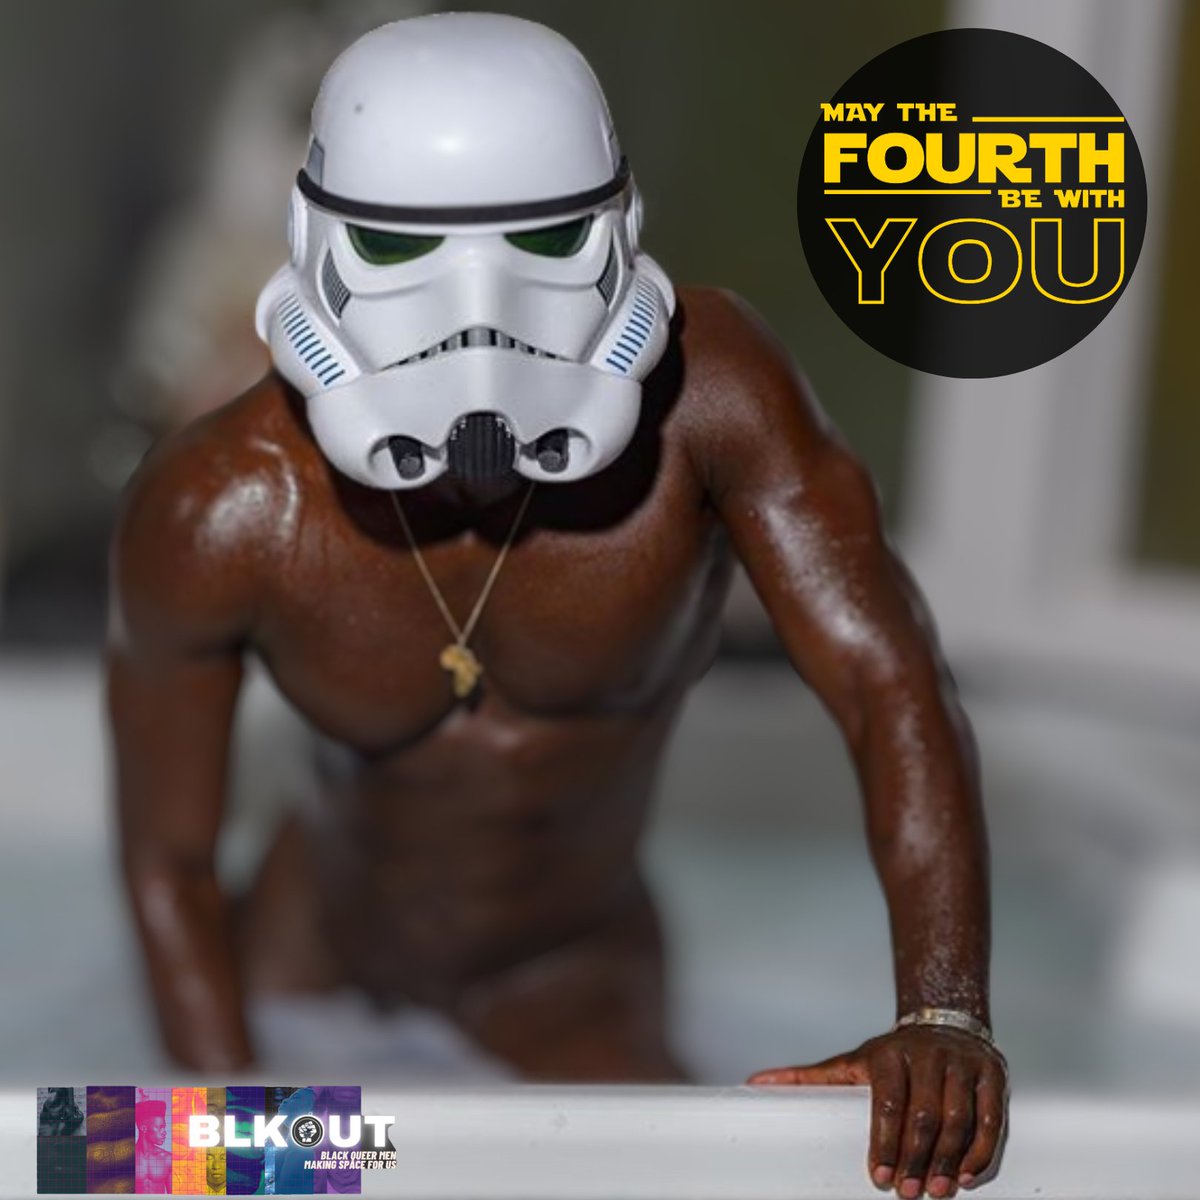 Happy Star Wars Day from @blkoutuk #makingspaceforus here rather than in a galaxy far, far away. Get connected, visit our website to join the BLKOUTHUB - the bespoke app for UK based Black Queer Men, with access to exclusive events, courses, and media designed by us, for us.